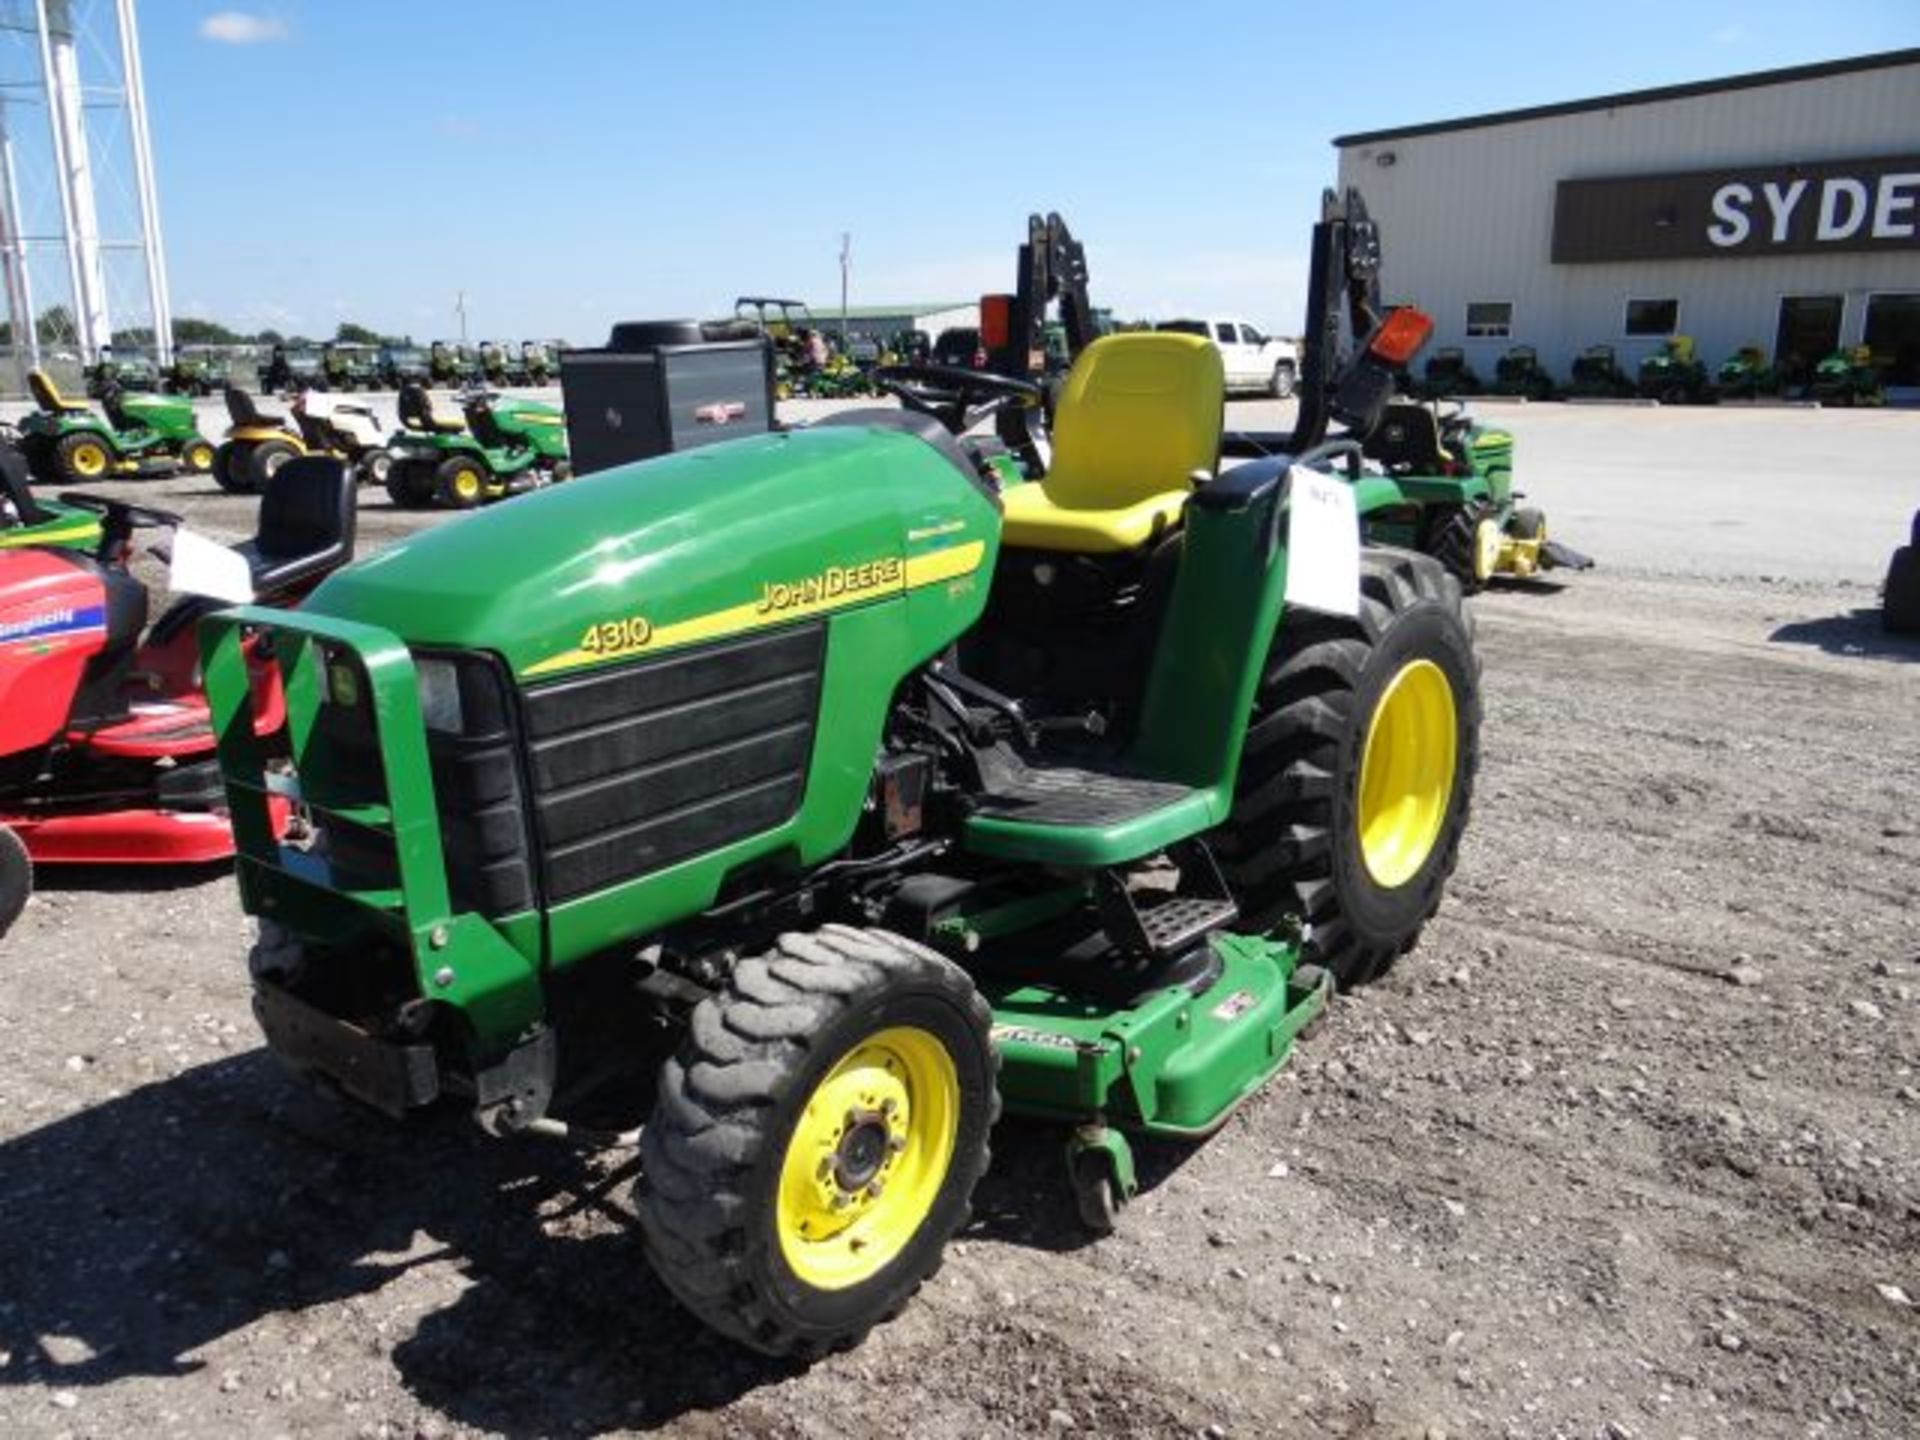 Lot 30476 - 2002 JD 4310 Compact Tractor 3500 hrs, 32hp, Diesel, MFWD, 3sp Hydro, Folding ROPS, - Image 2 of 5